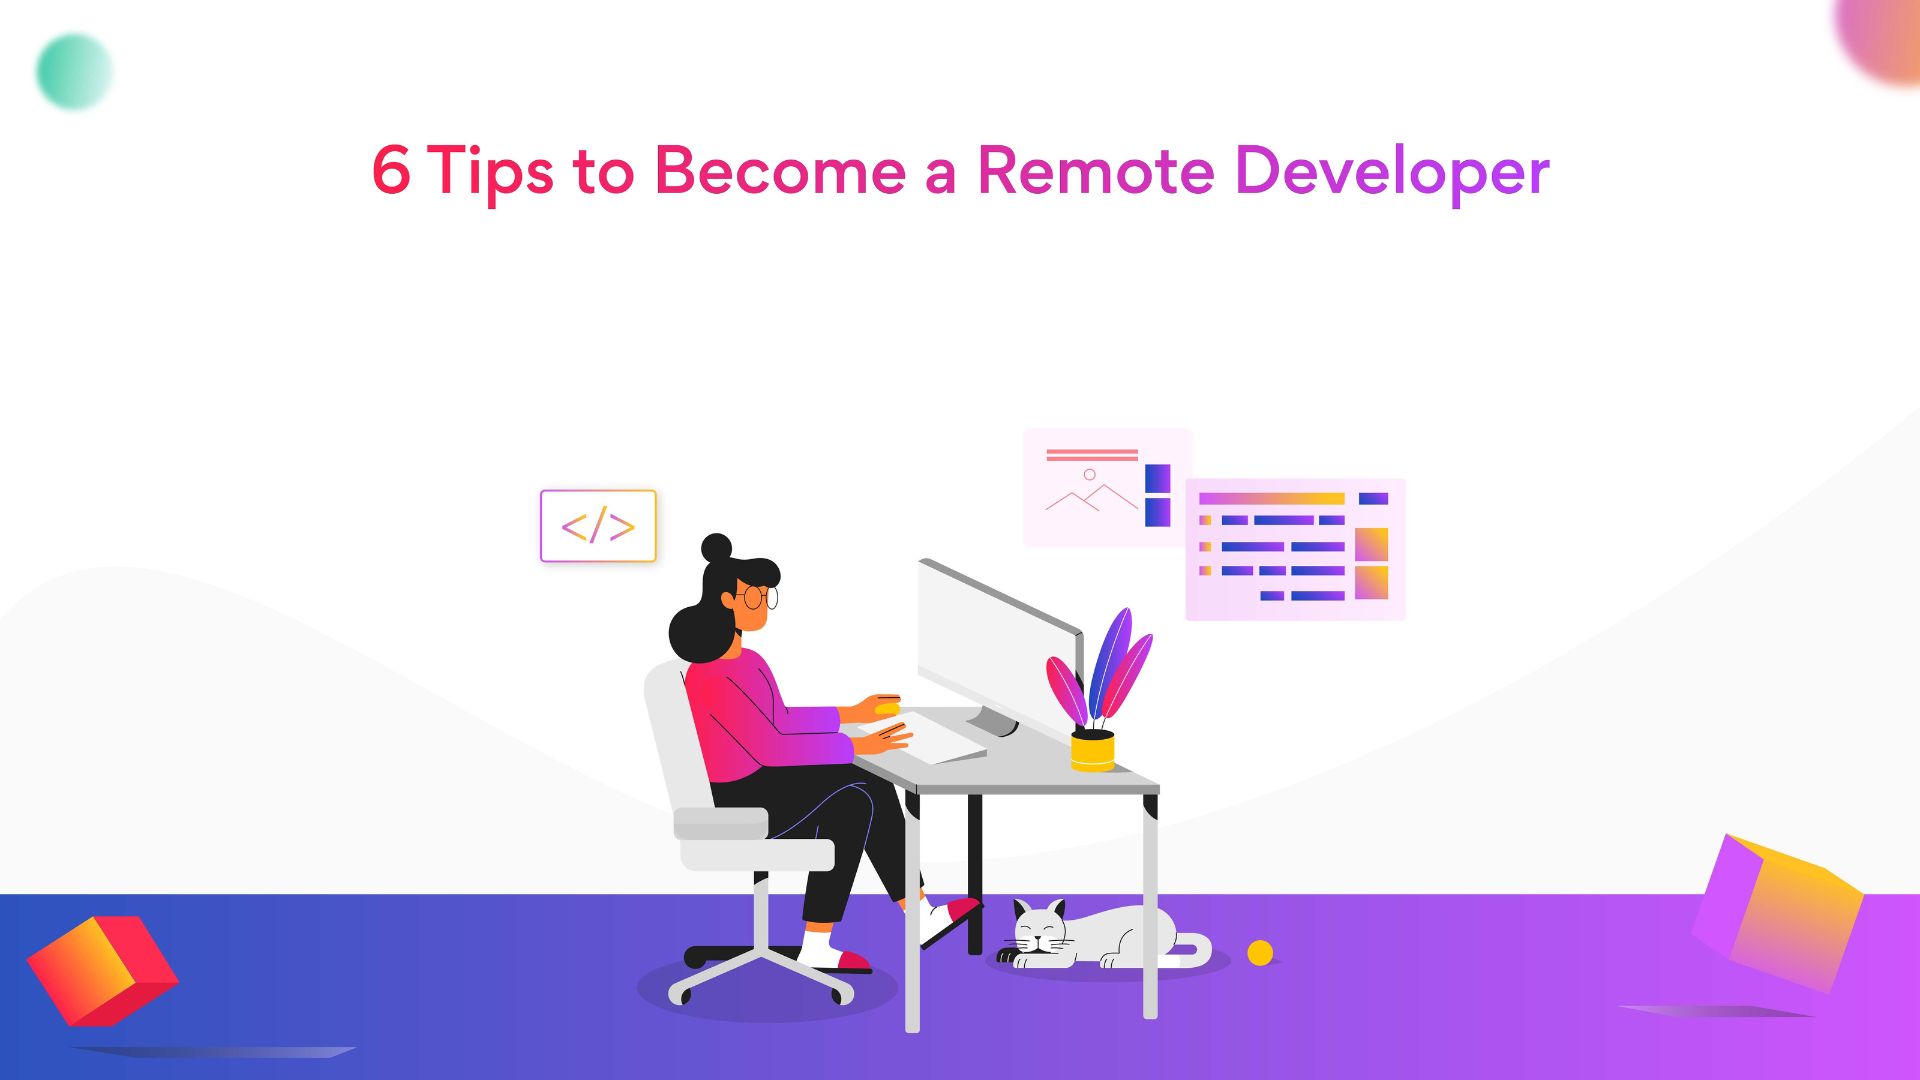 Tips to become a remote developer